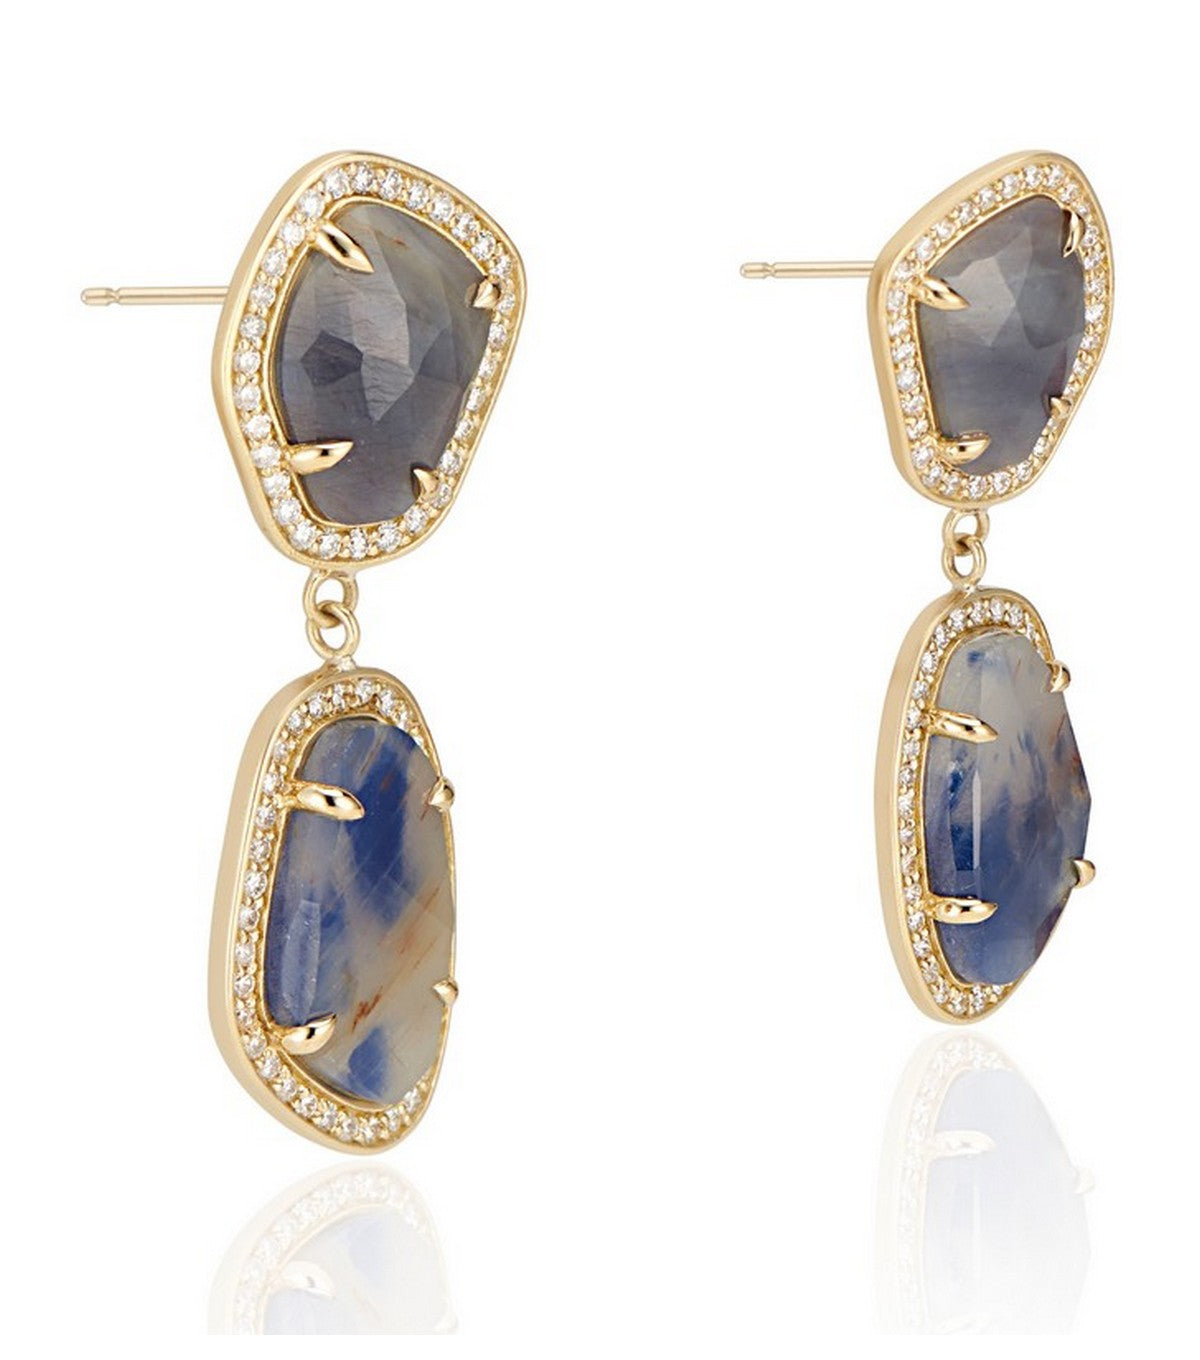 18K yellow gold, these one-of-a-kind earrings are designed to emphasize the wild and raw beauty of the natural sapphires.